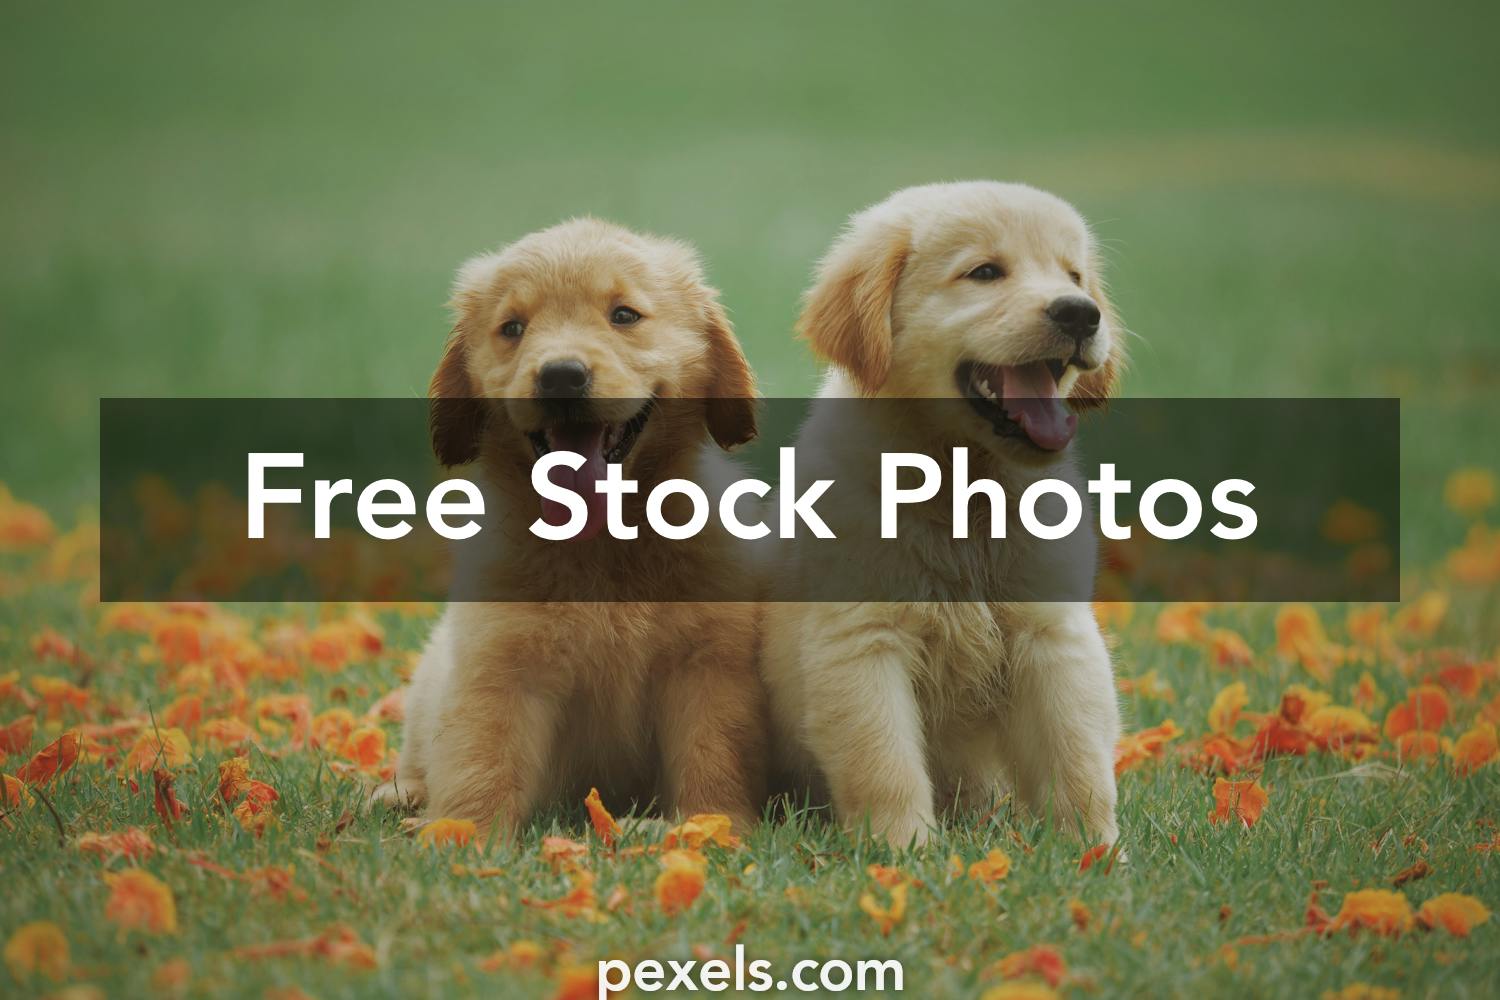 Dog Wallpaper Photos, Download The BEST Free Dog Wallpaper Stock Photos &  HD Images